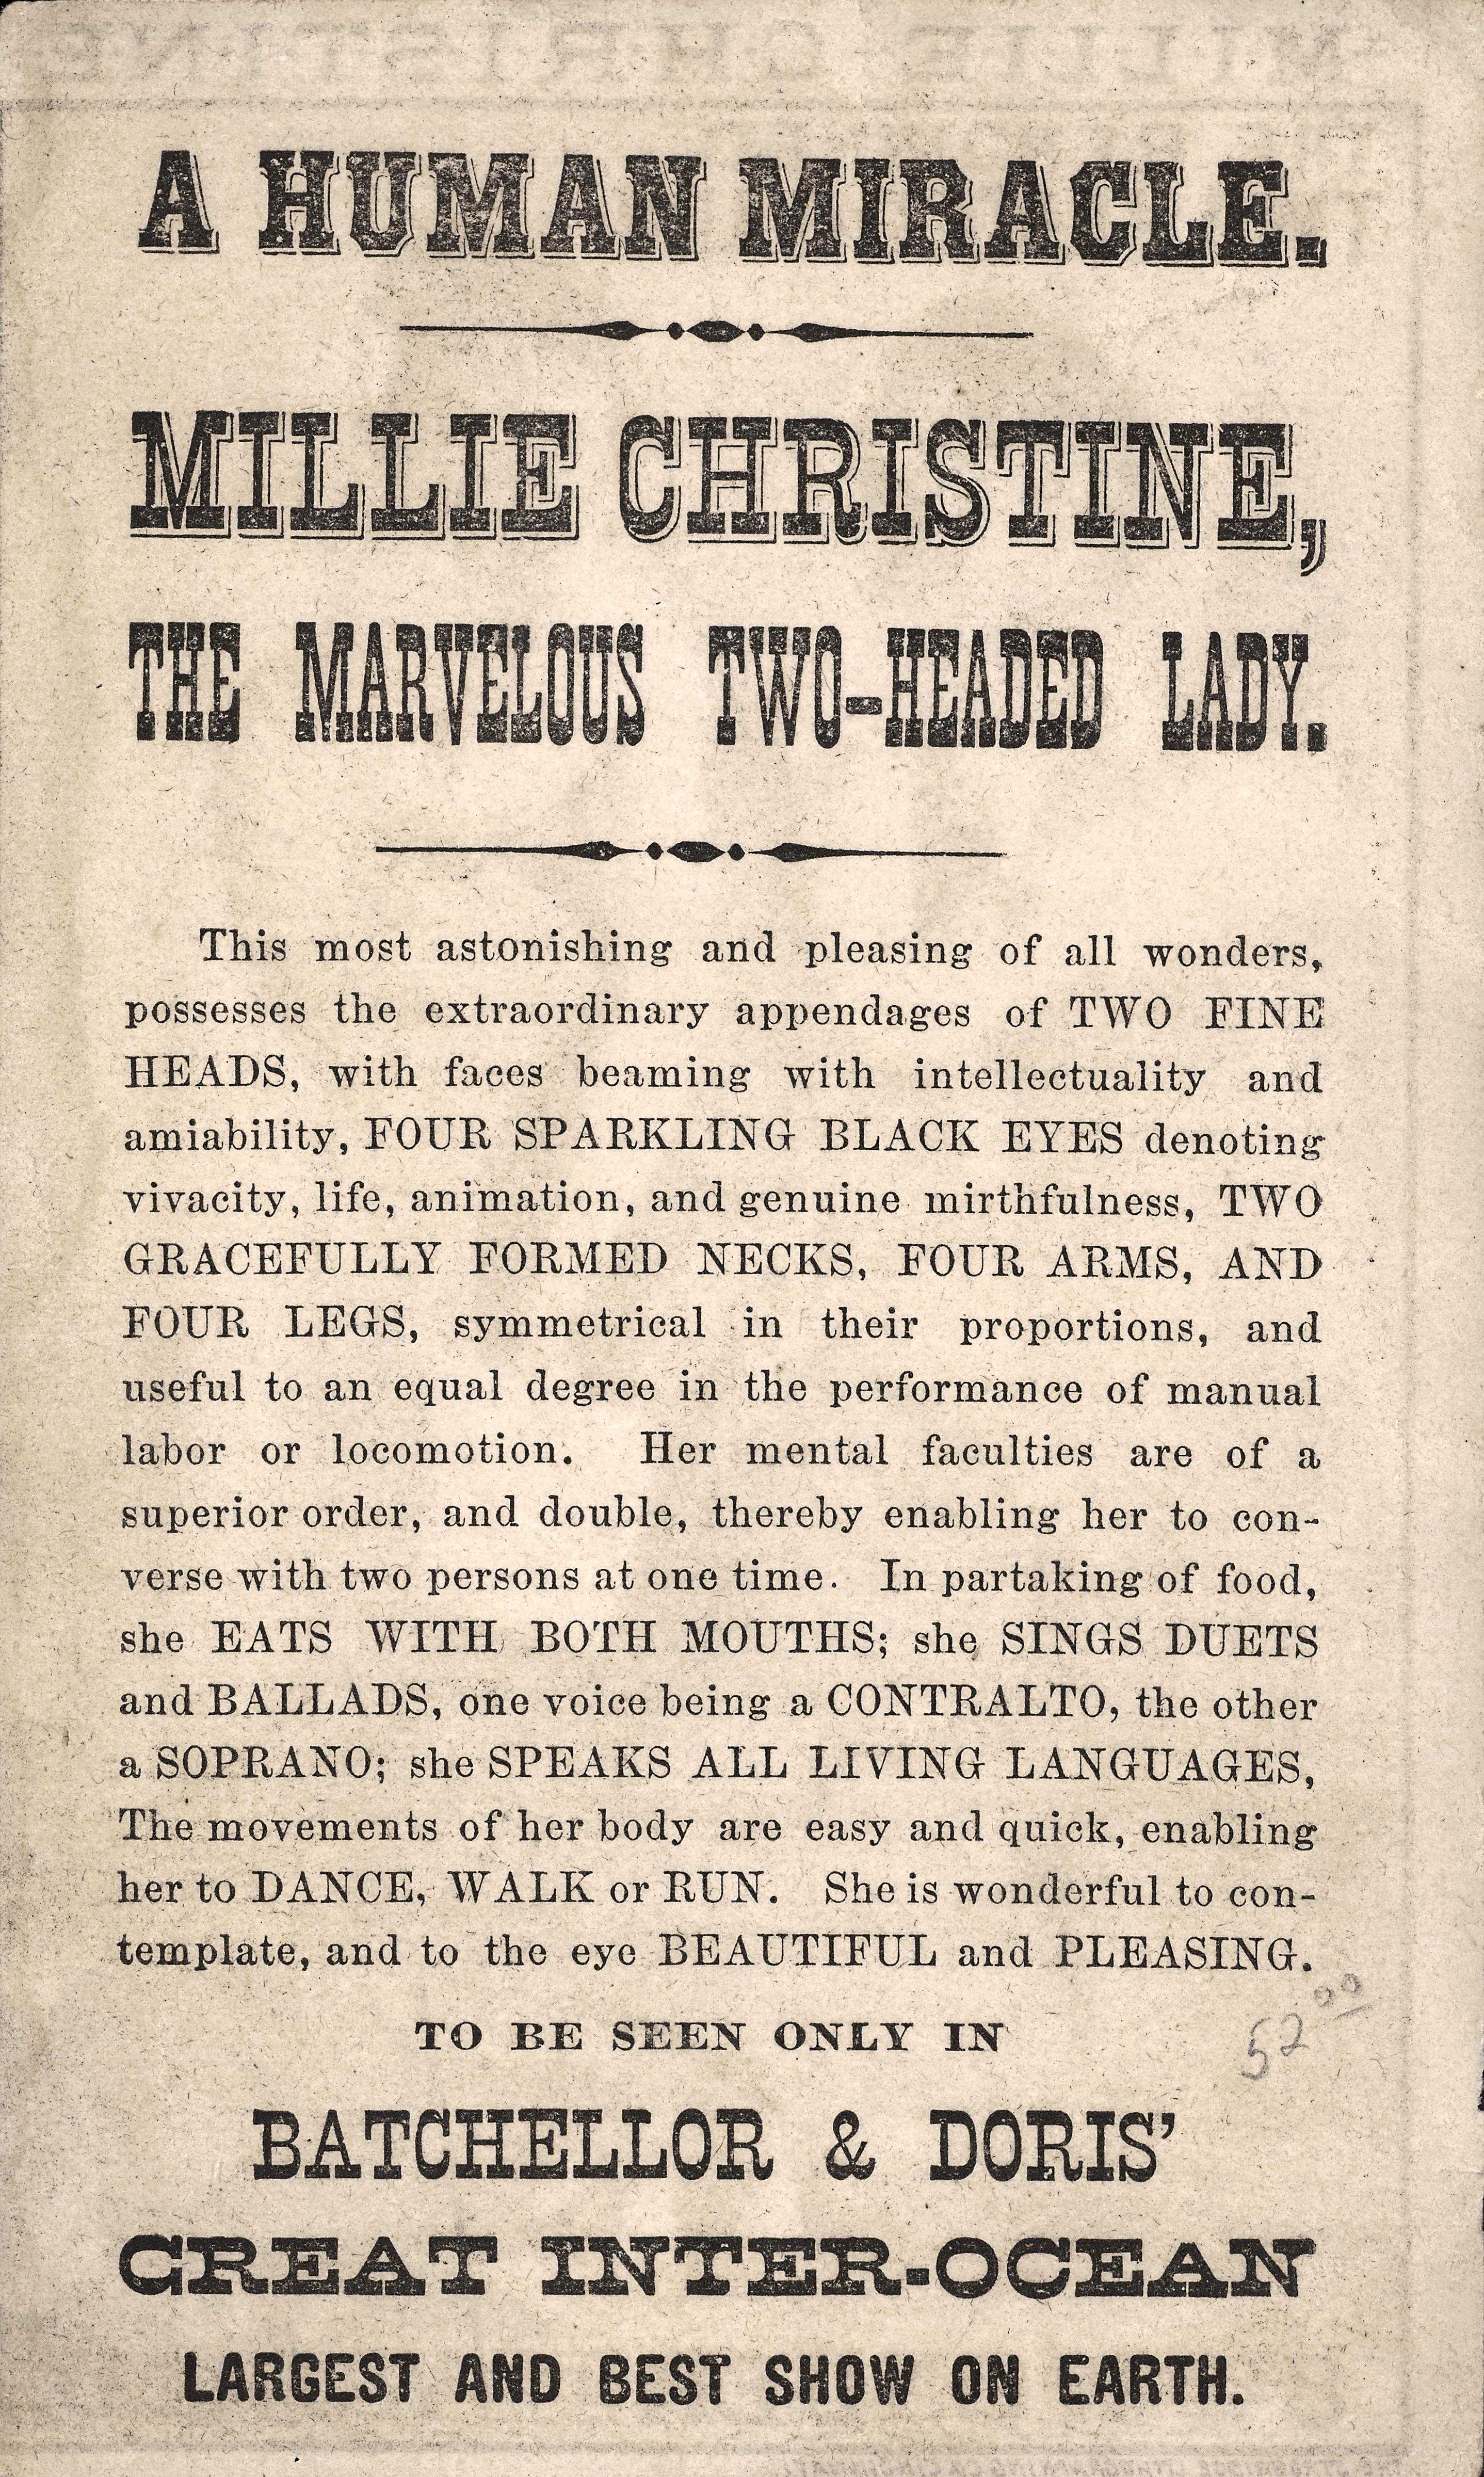 Image of typed advertisement for Millie Christine